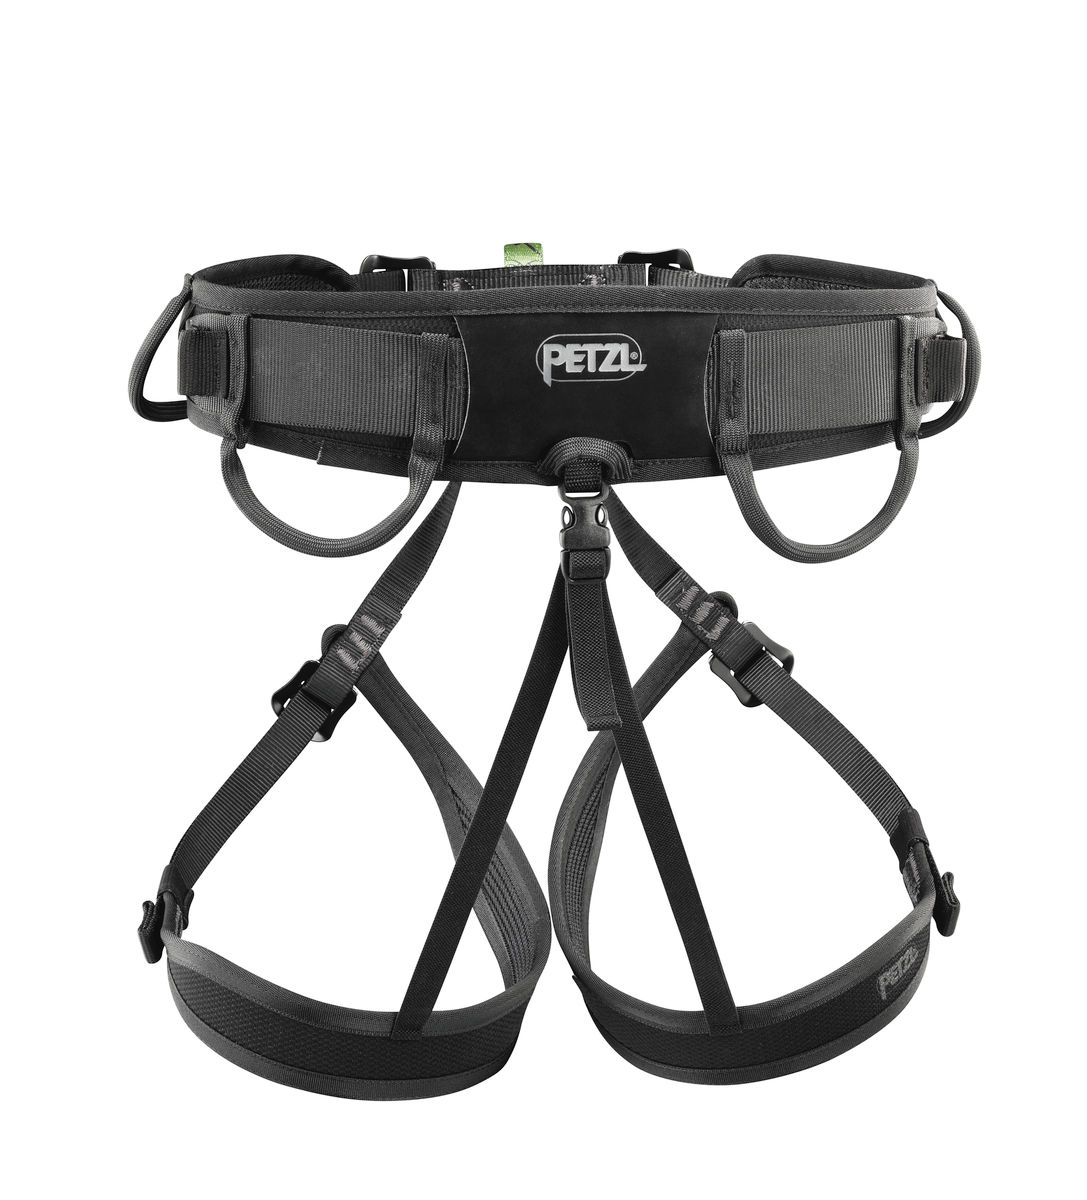 Skylotec Tower Pro Harness with Aluminum D-rings G-1080